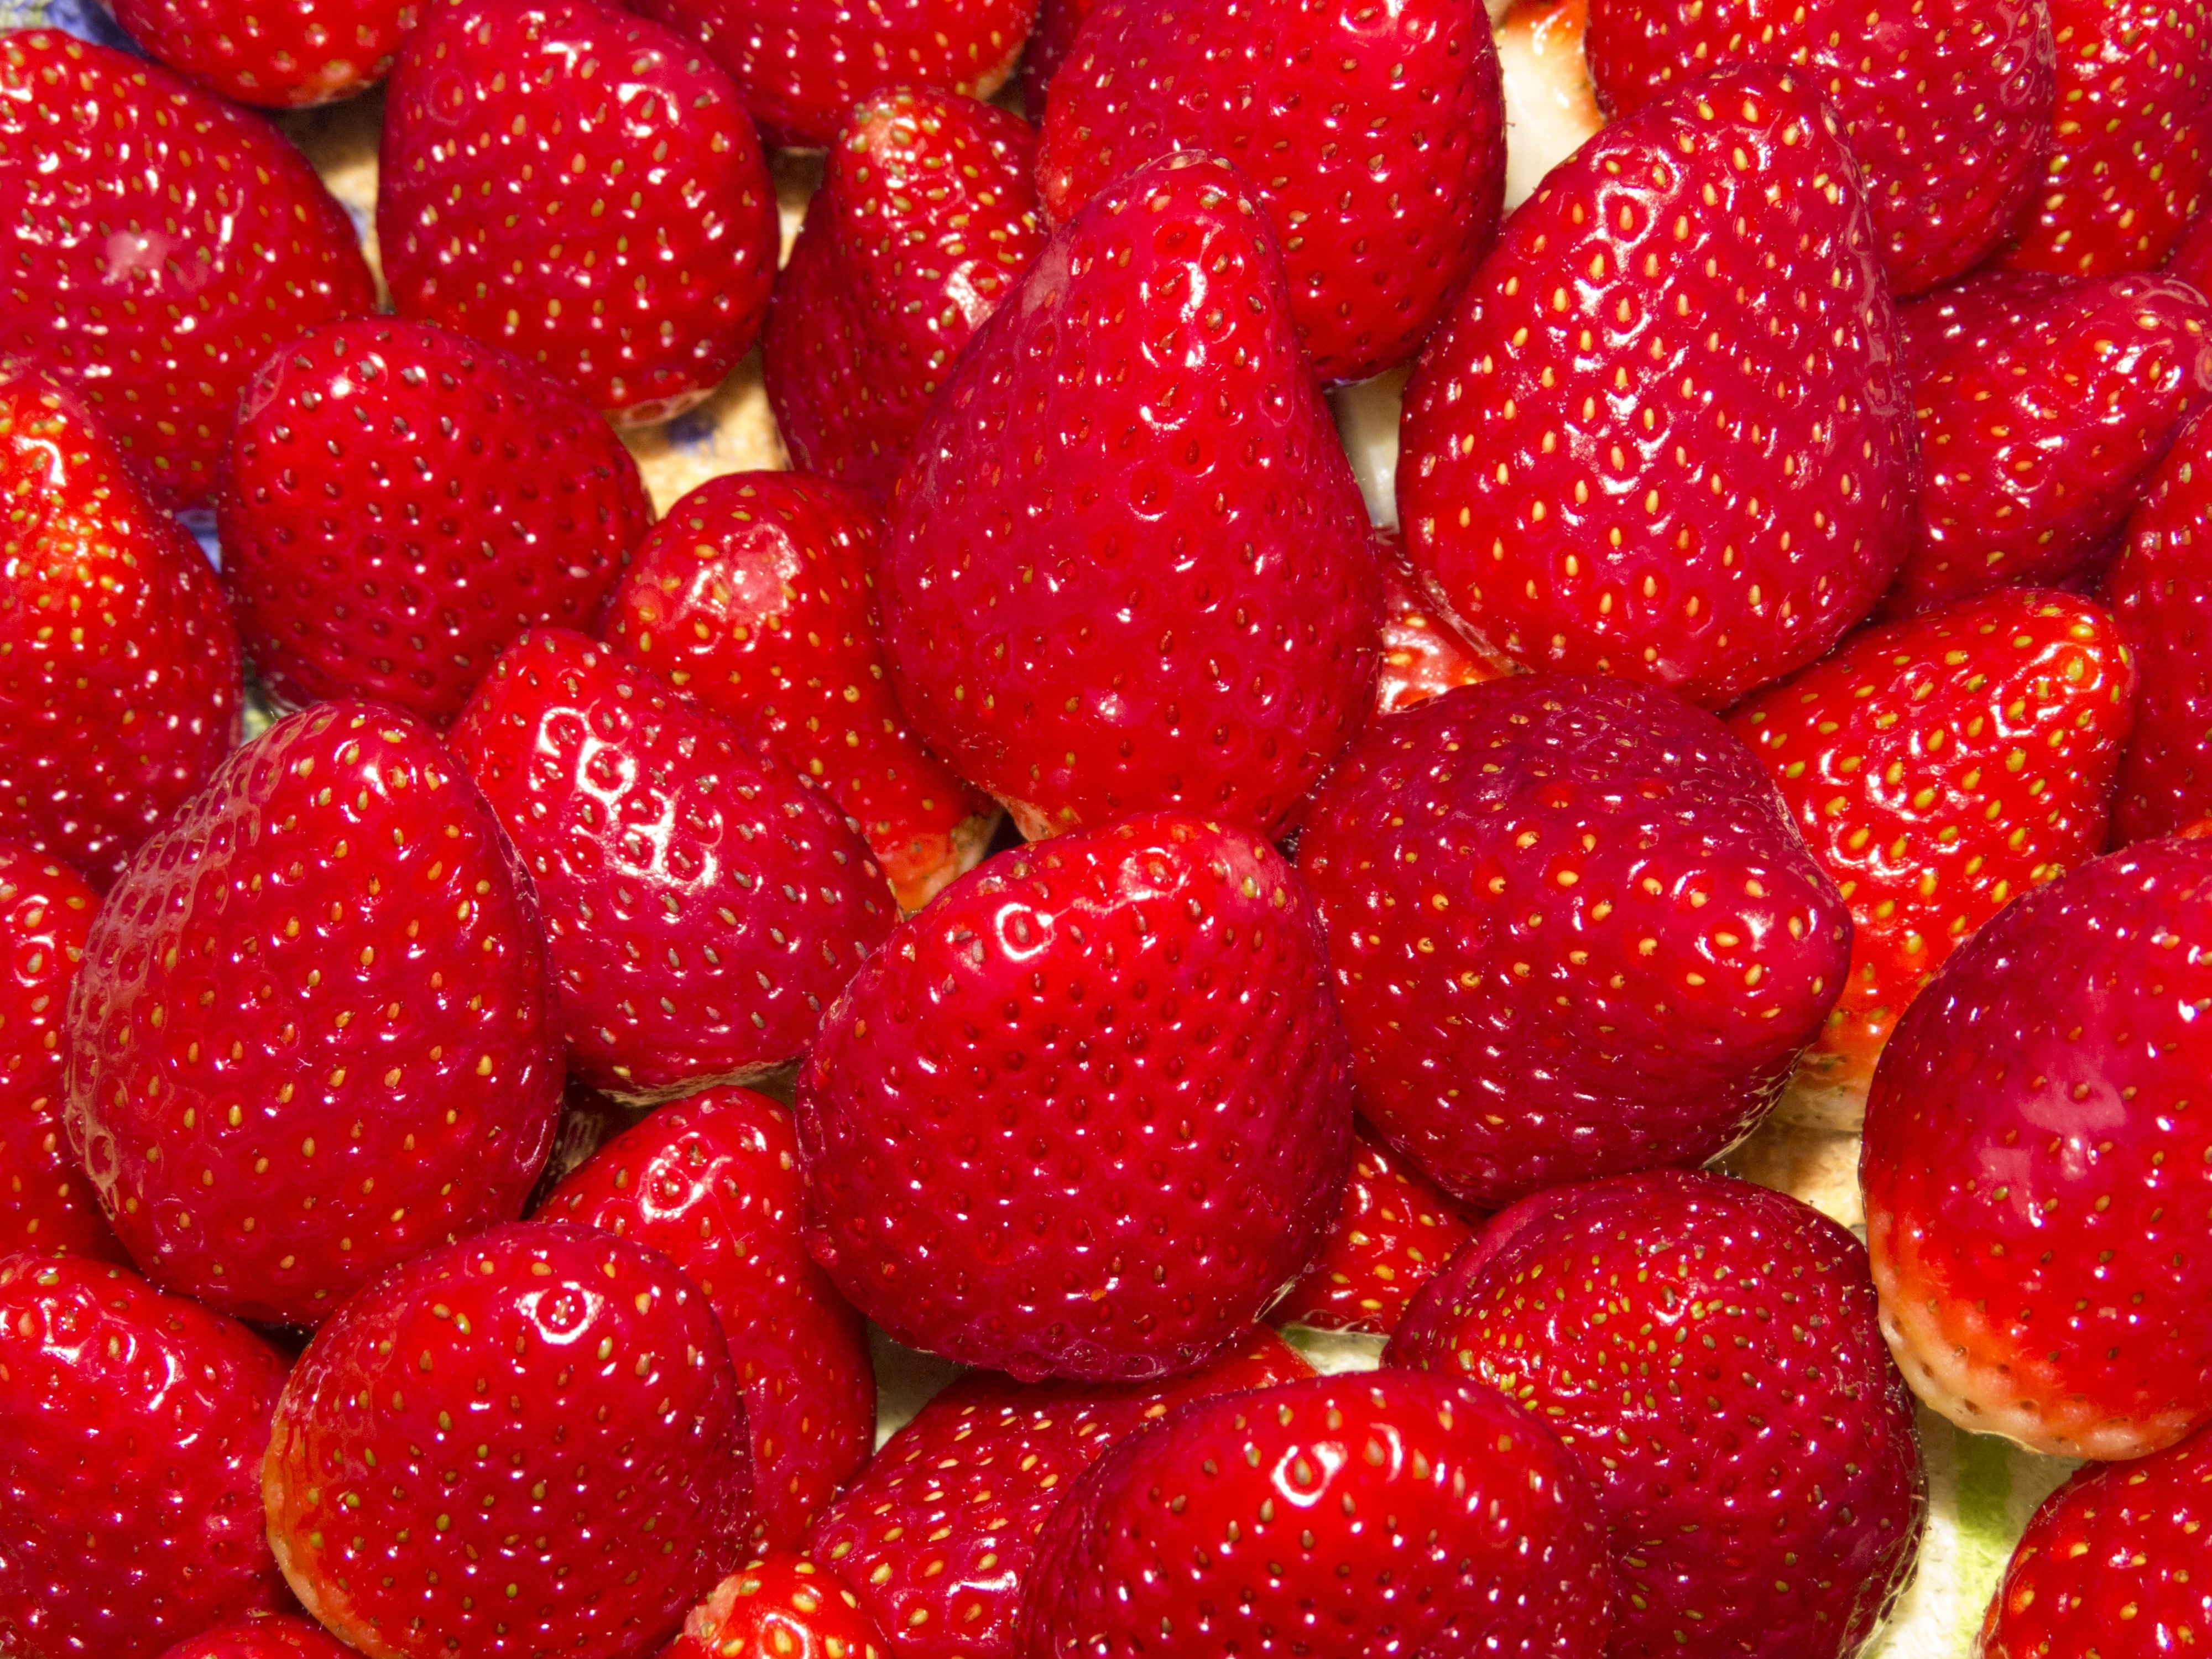 red strawberry fruit